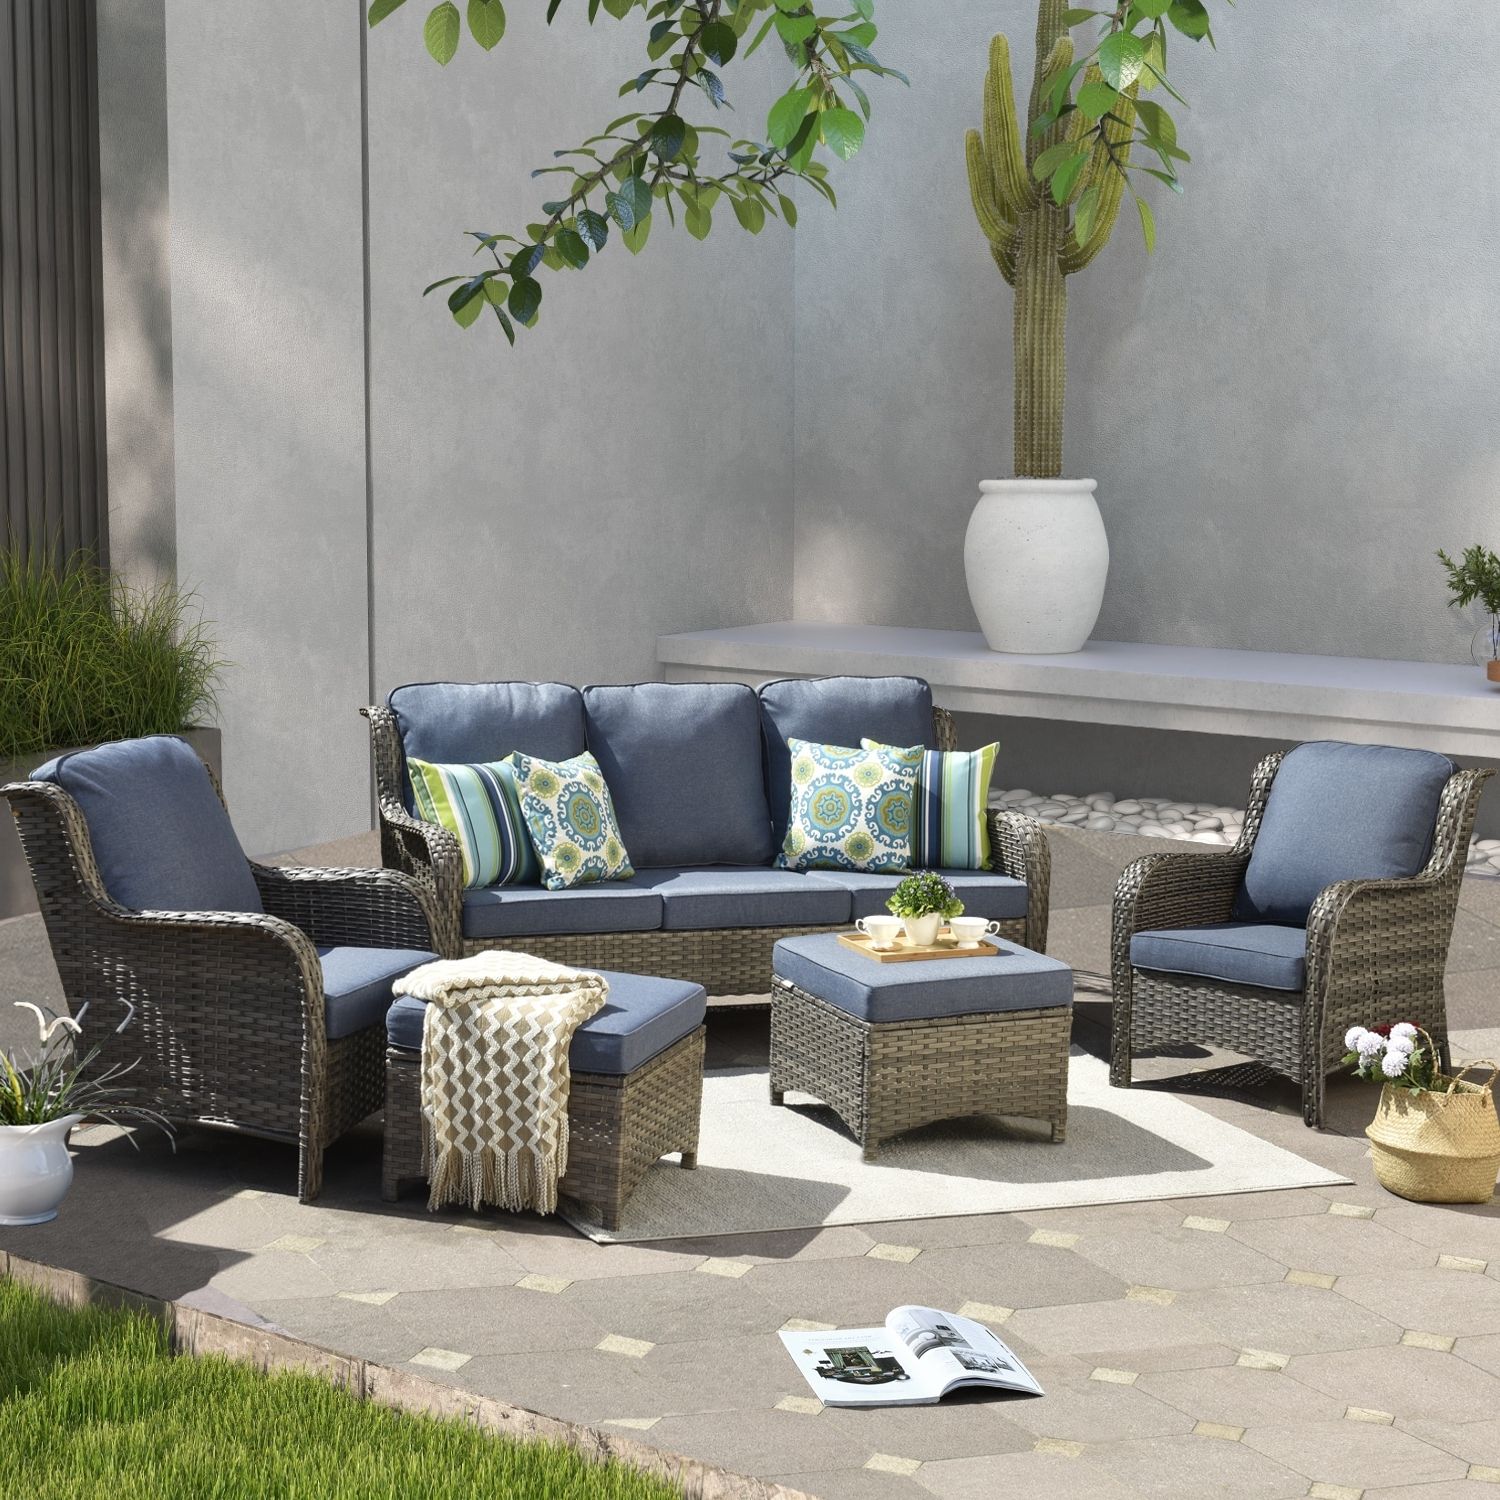 2018 5 Piece Patio Conversation Set Intended For Ovios 5 Piece Patio Conversation Wicker Furniture Set – On Sale – – 31733697 (Photo 15 of 15)